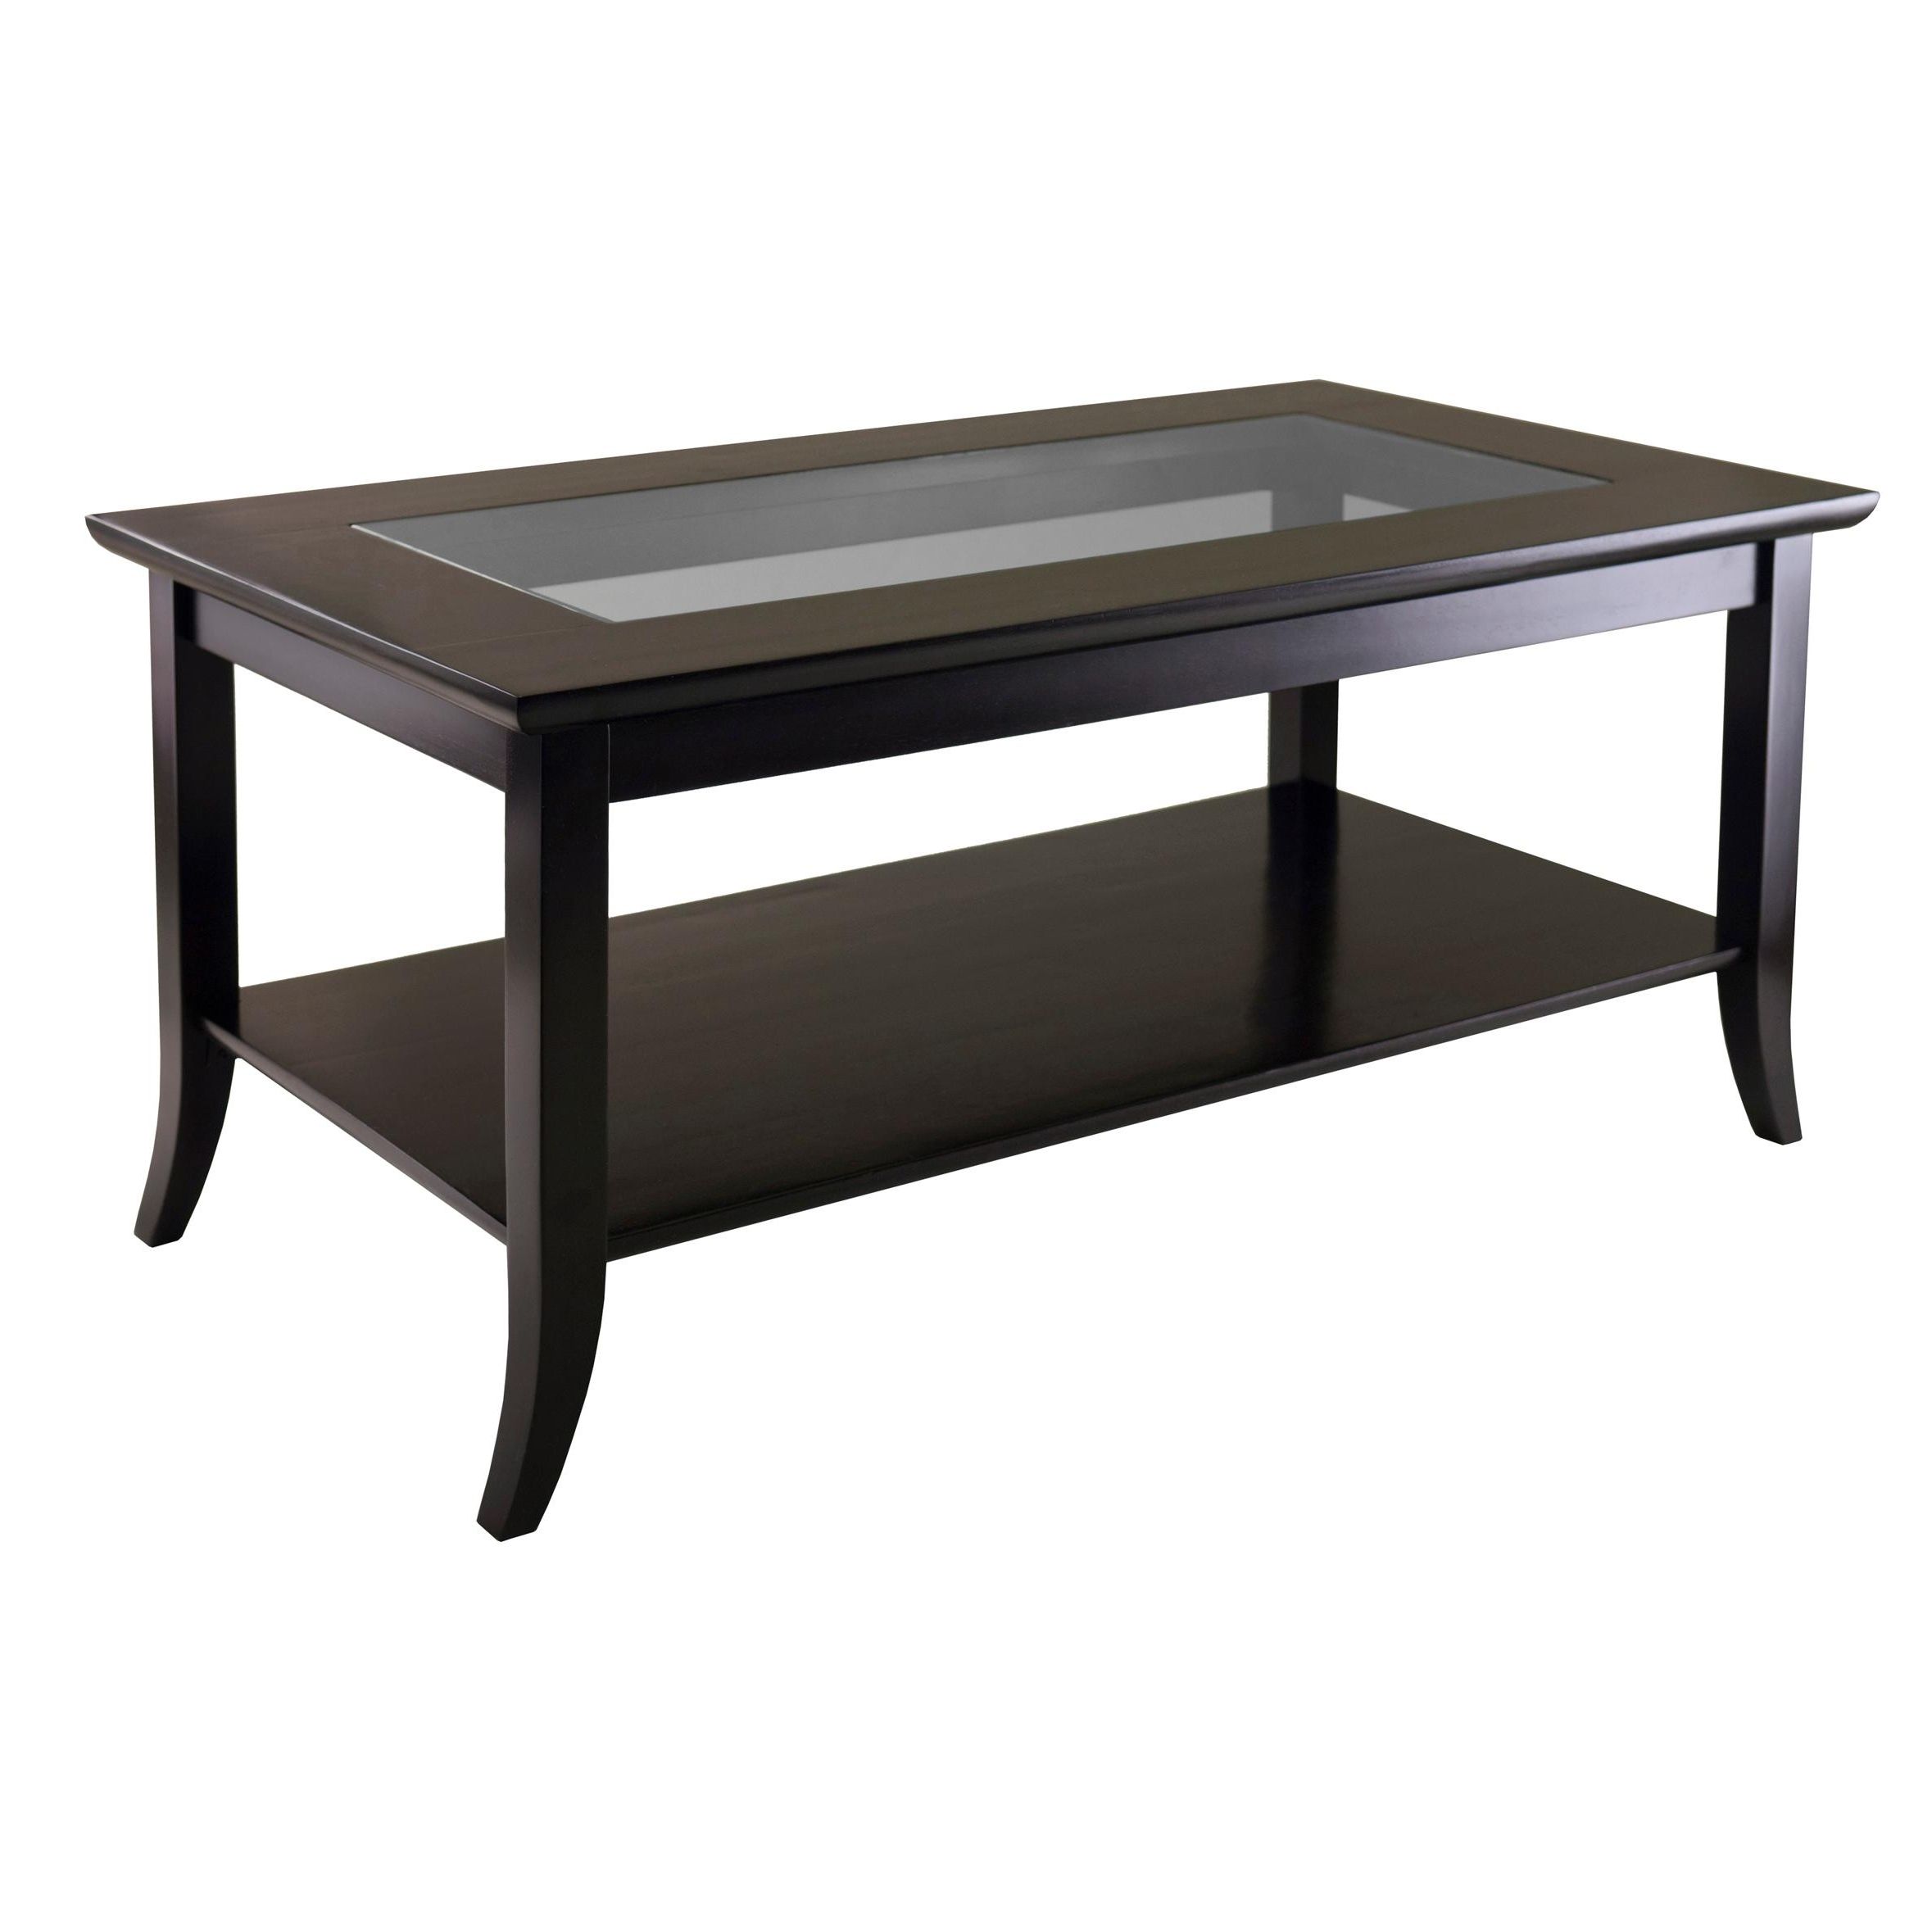 Lovely Table Top Coffee Loon Peak Bryan Lift Reviews Wayfair – Just With Regard To Latest Jaxon Grey Lift Top Cocktail Tables (Gallery 3 of 20)